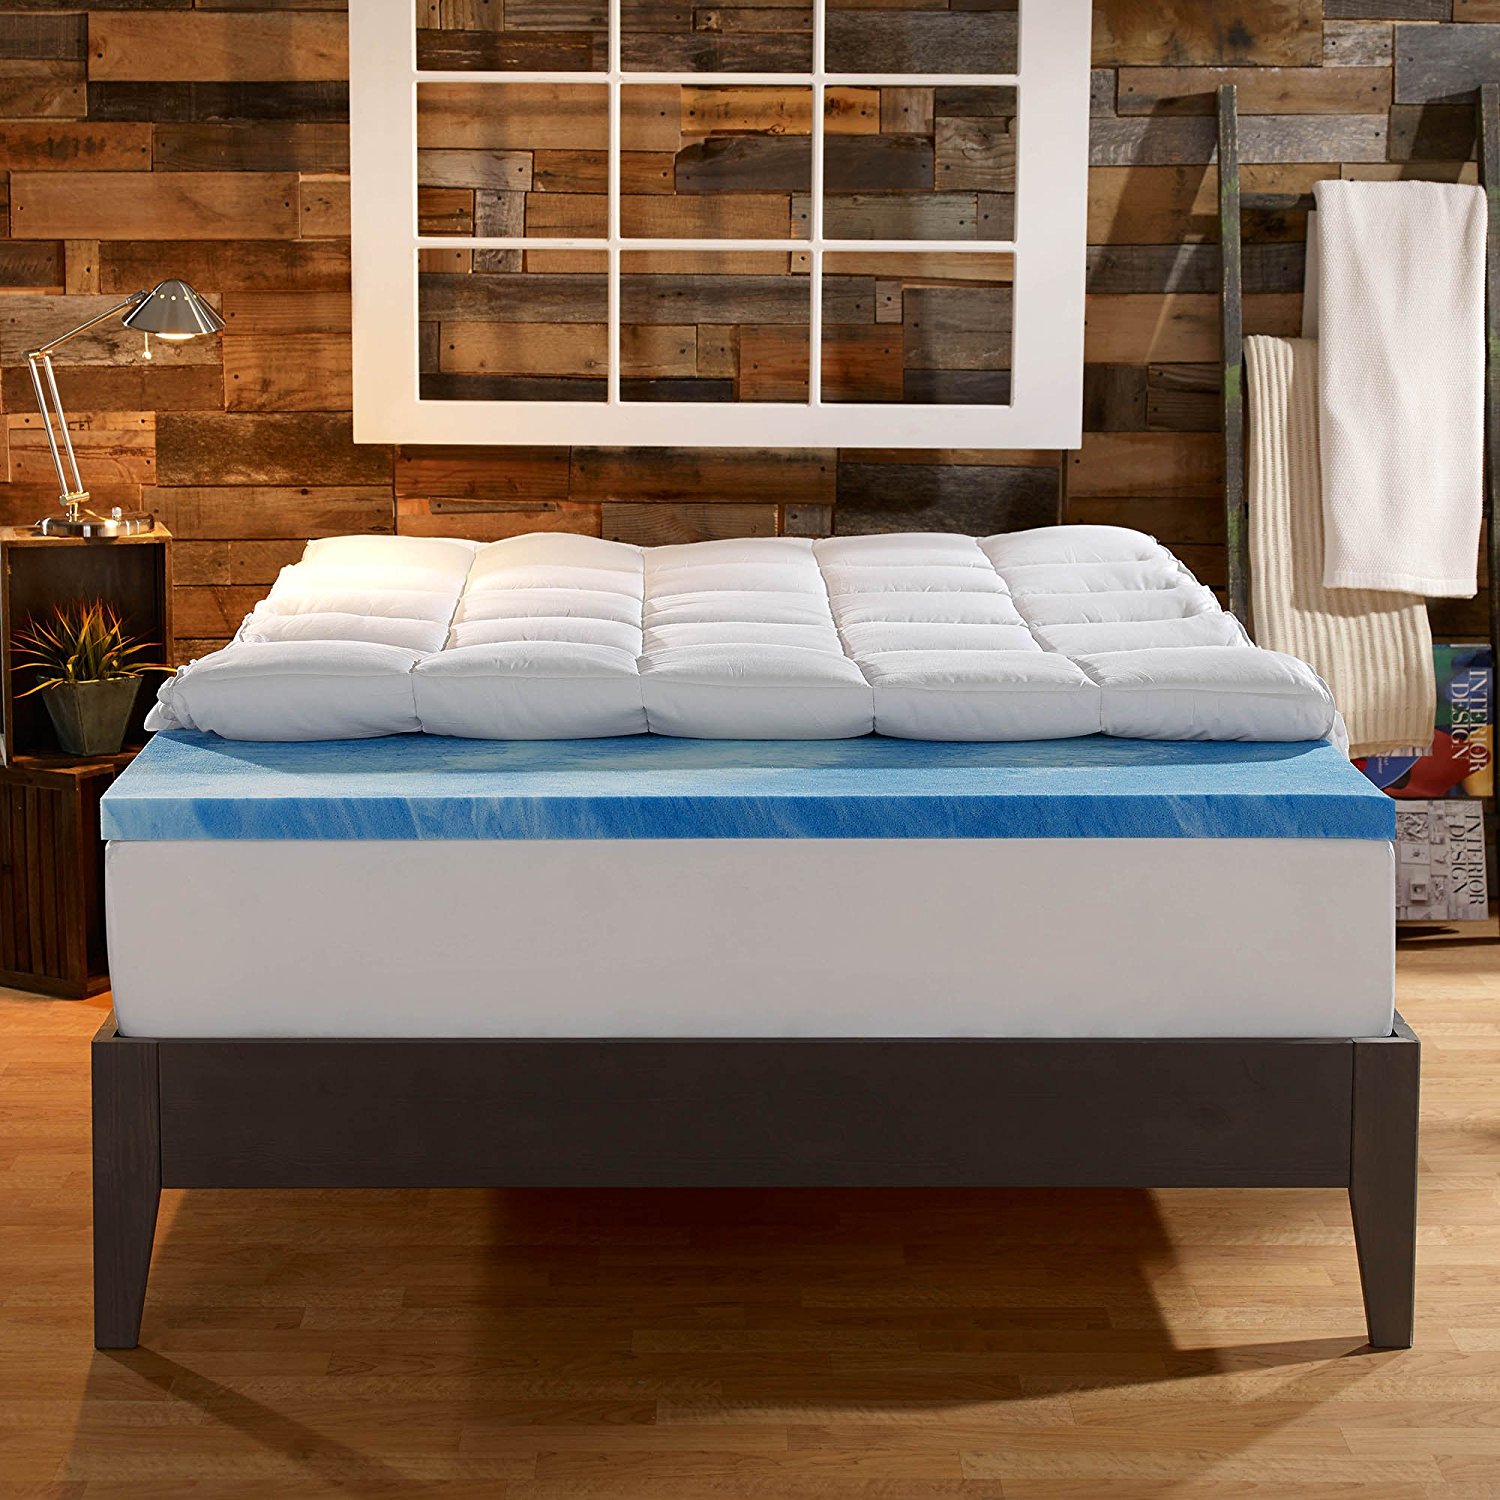 Sleep Innovations 4-Inch Dual Layer Mattress Topper - Gel Memory Foam and Plush Fiber. 10-year limited warranty. Cal King Size